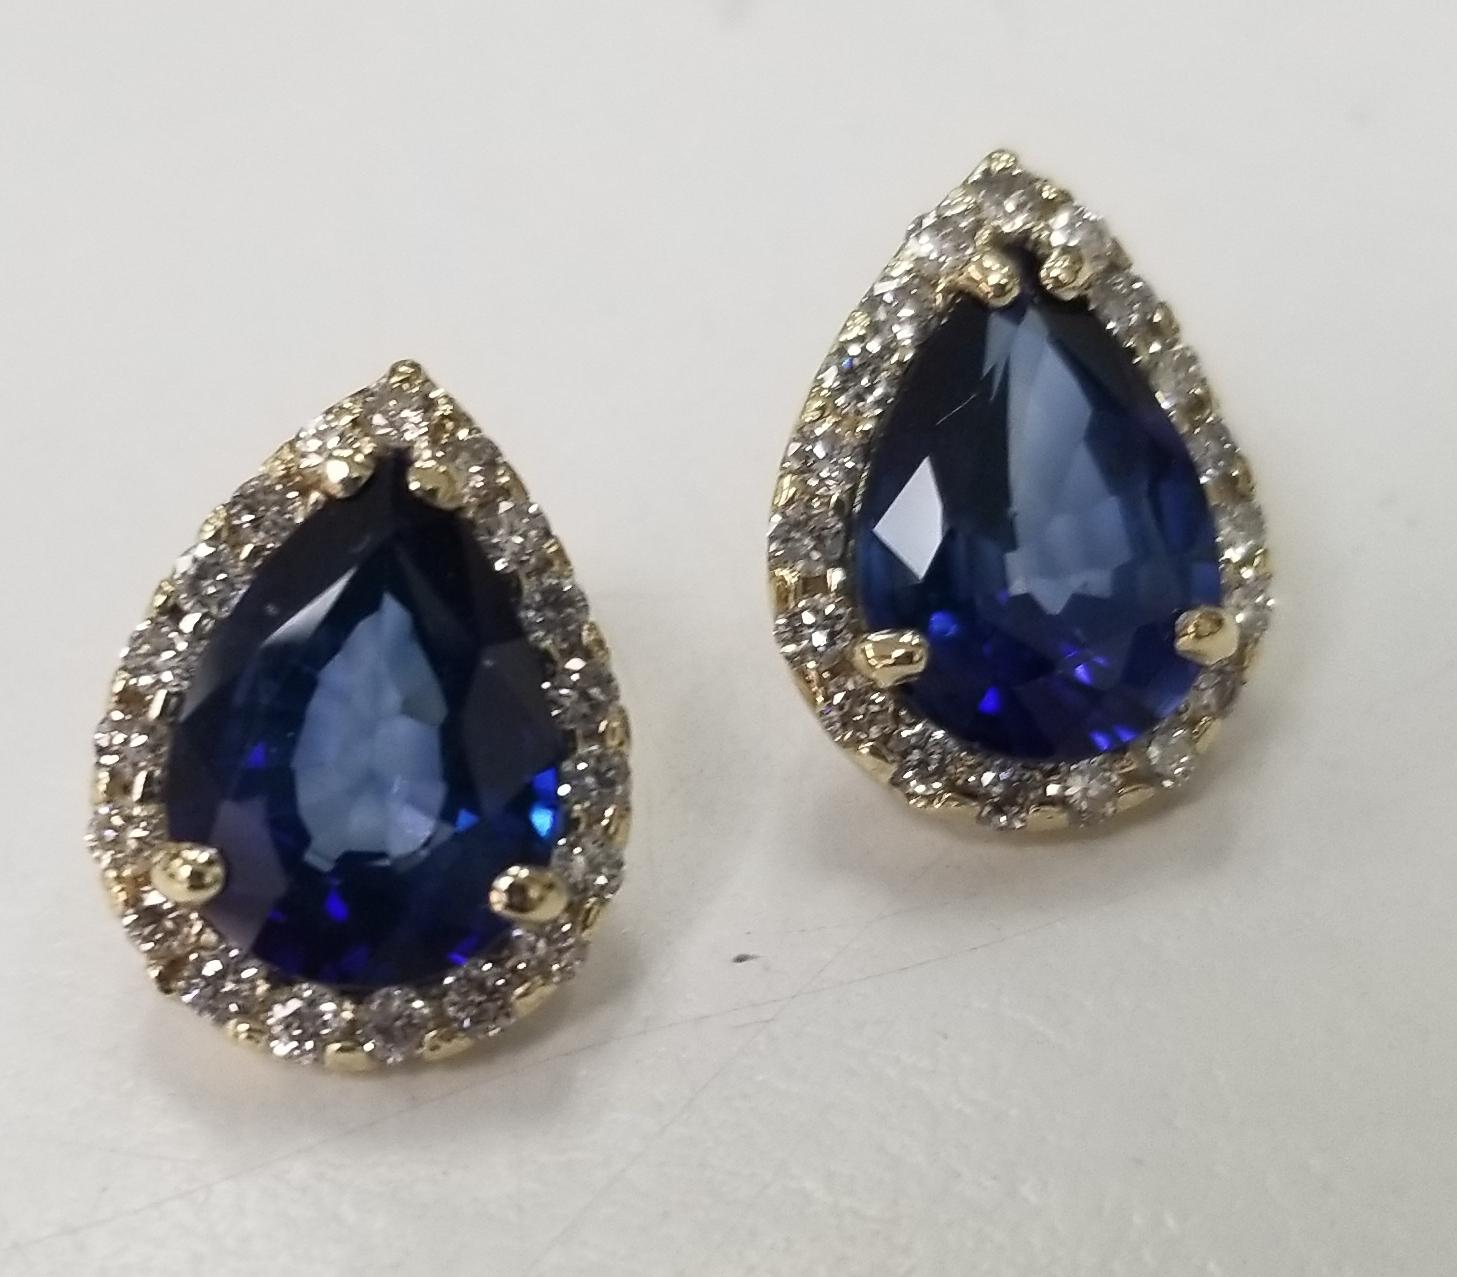 14 karat yellow gold Synthetic sapphire and diamond pear shape halos, containing 2 pear shape Synthetic sapphires weighing 6.41cts. surrounded by 38 round full cut diamonds weighing .65pts.